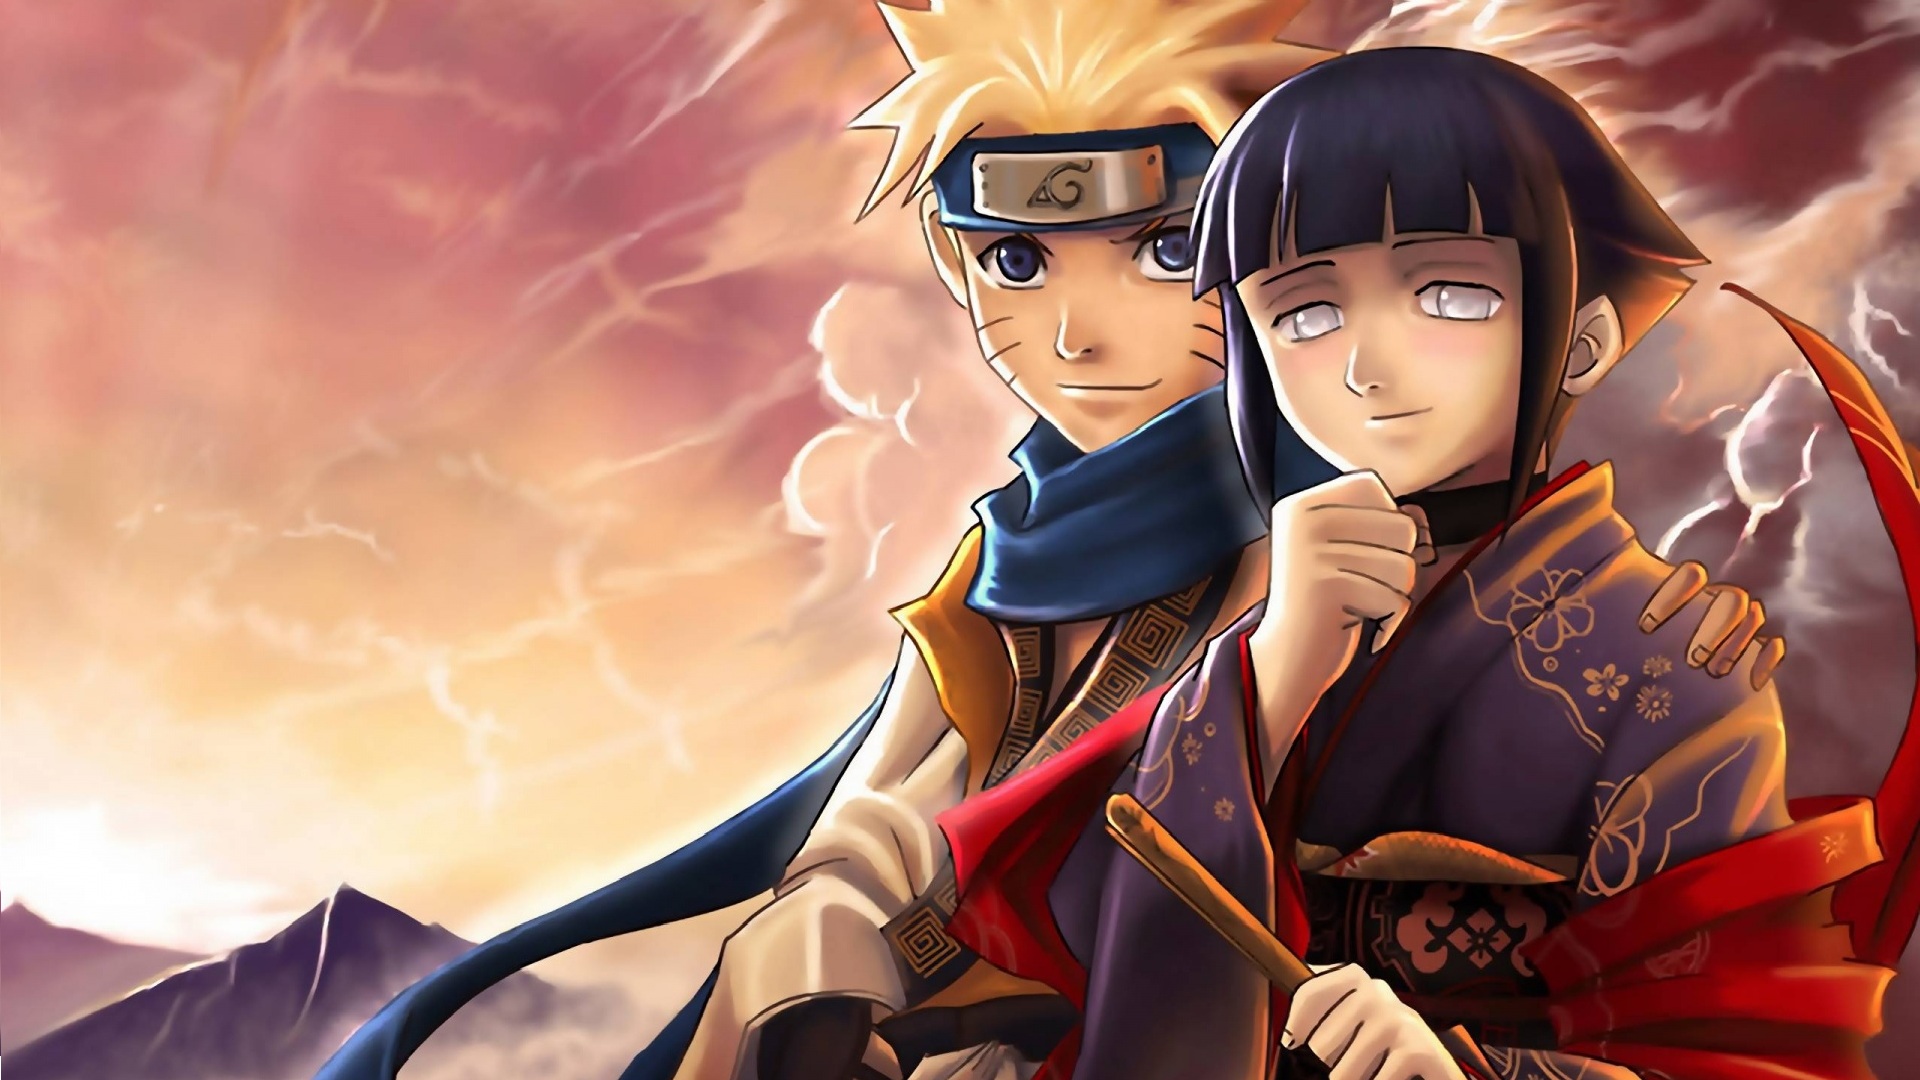 Have some Naruto wallpapers image Anime Fans of modDB